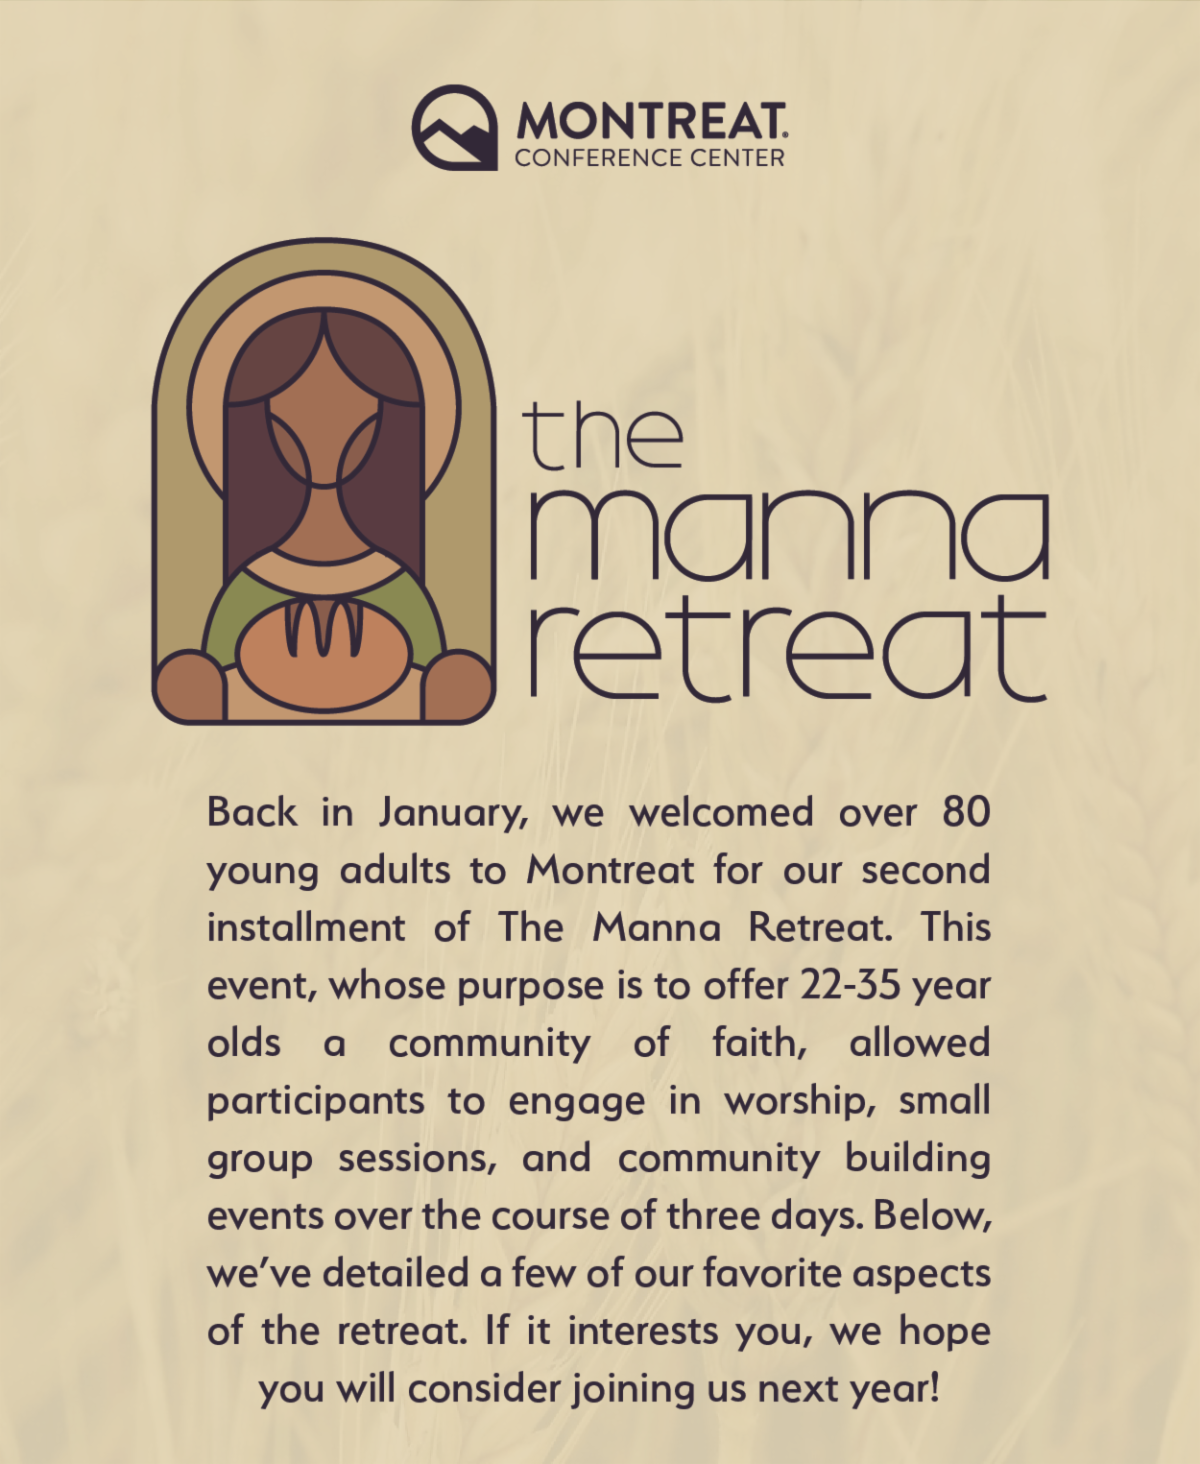 The Manna Retreat - Back in January, we welcomed over 80 young adults to Montreat for our second installment of The Manna Retreat. This event, whose purpose is to offer 22-35 year olds a community of faith, allowed participants to engage in worship, small group sessions, and community building events over the course of three days. Below, we’ve detailed a few of our favorite aspects of the retreat. If it interests you, we hope you will consider joining us next year!